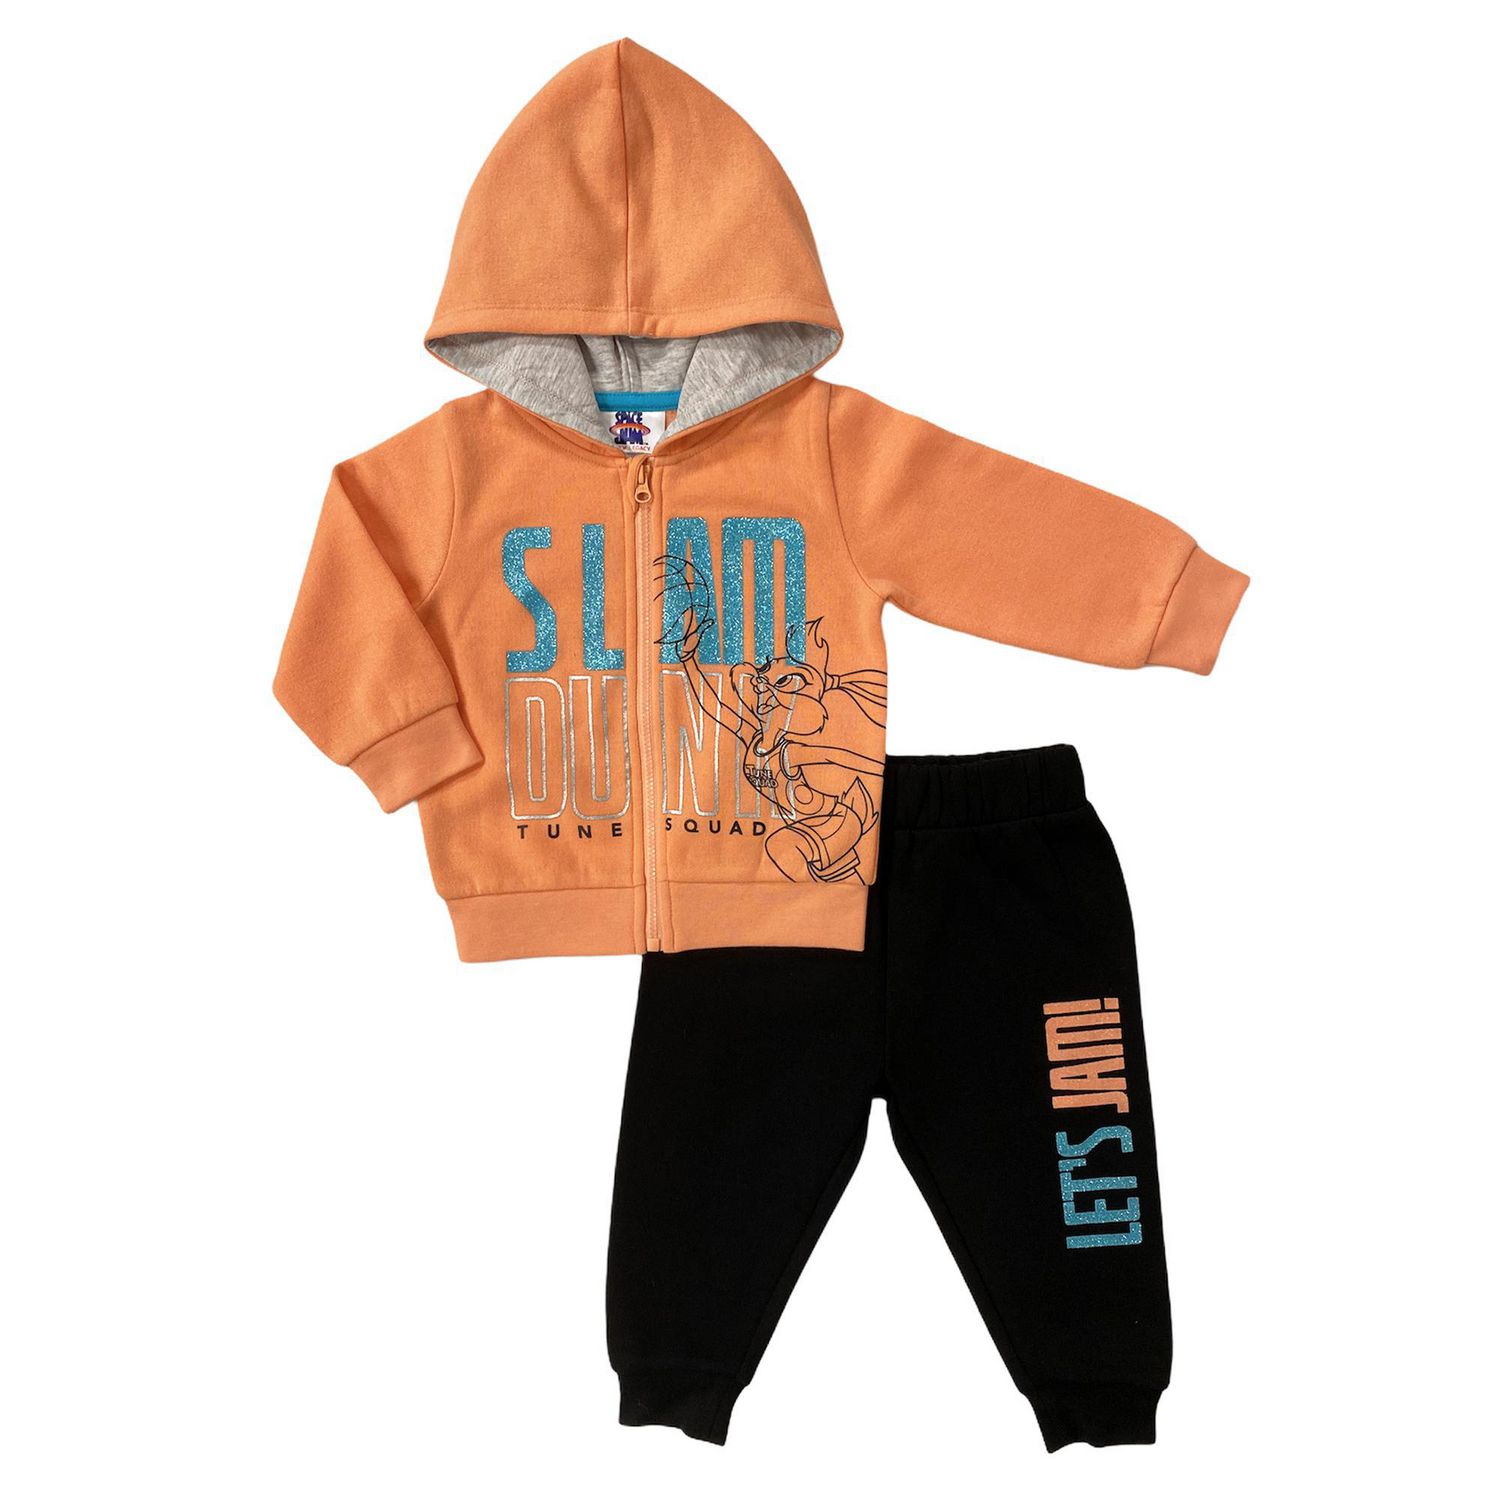 Kid space-jam-tune-squad-2 Pullover Hoodie and Sweatpants Suit for Boys Girls 2 Piece Outfit Sweatshirt Set 